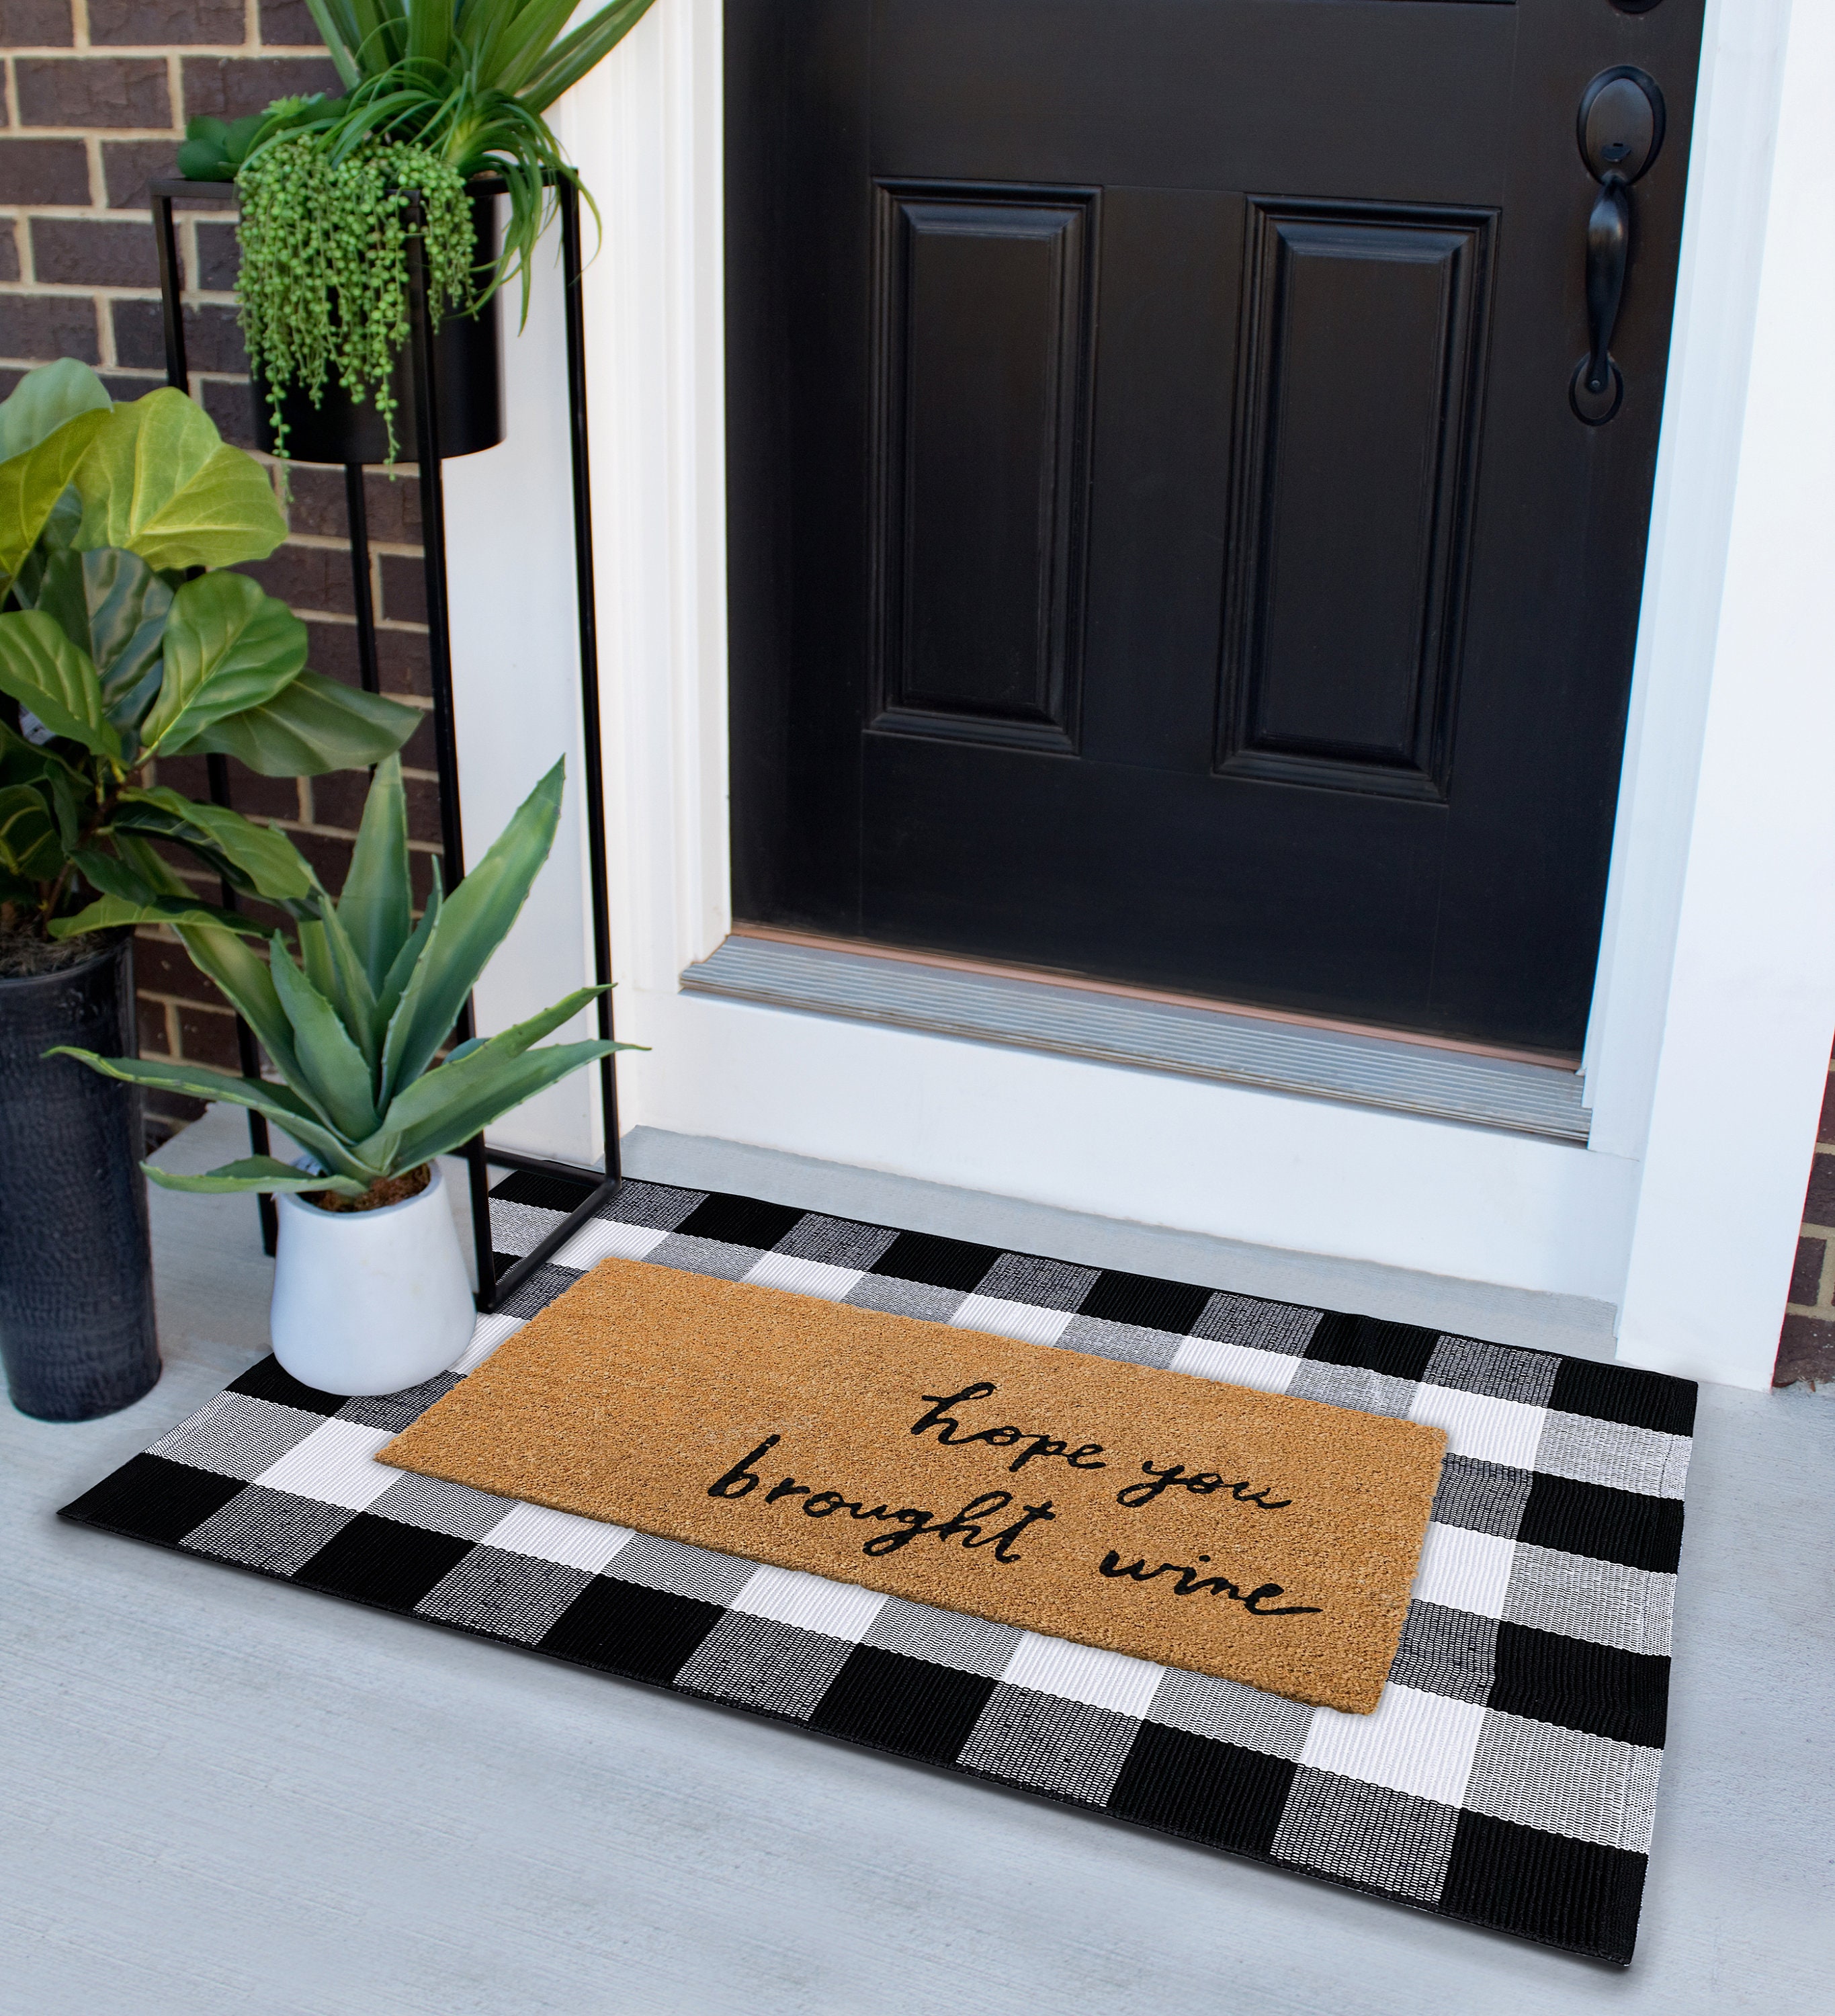 LBCASA Black White Plaid Indoor Door Mat - 16x24, Non-Slip Welcome Mat  for Patio, Gnomes Skate Geometric Space Abstract Art Front Door Rug for